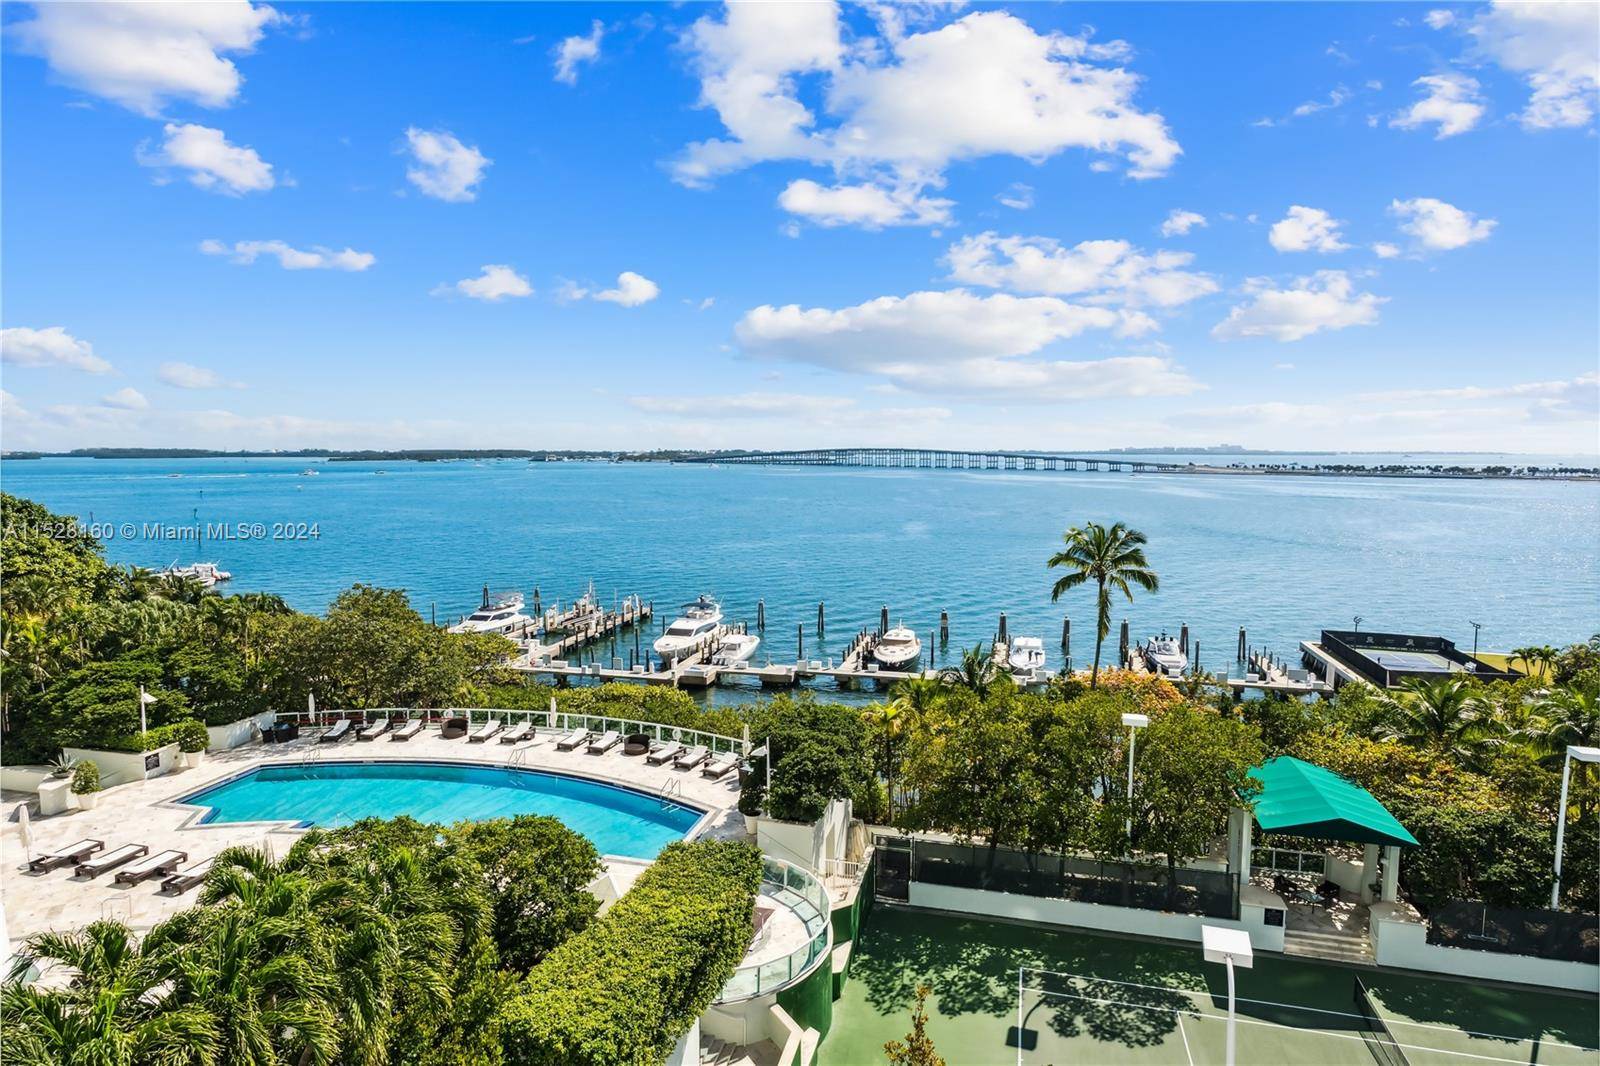 Discover unparalleled luxury in this exquisite 3 bedroom bayfront residence at the iconic Santa Maria, accessible via private elevator and offering mesmerizing bay and skyline views.